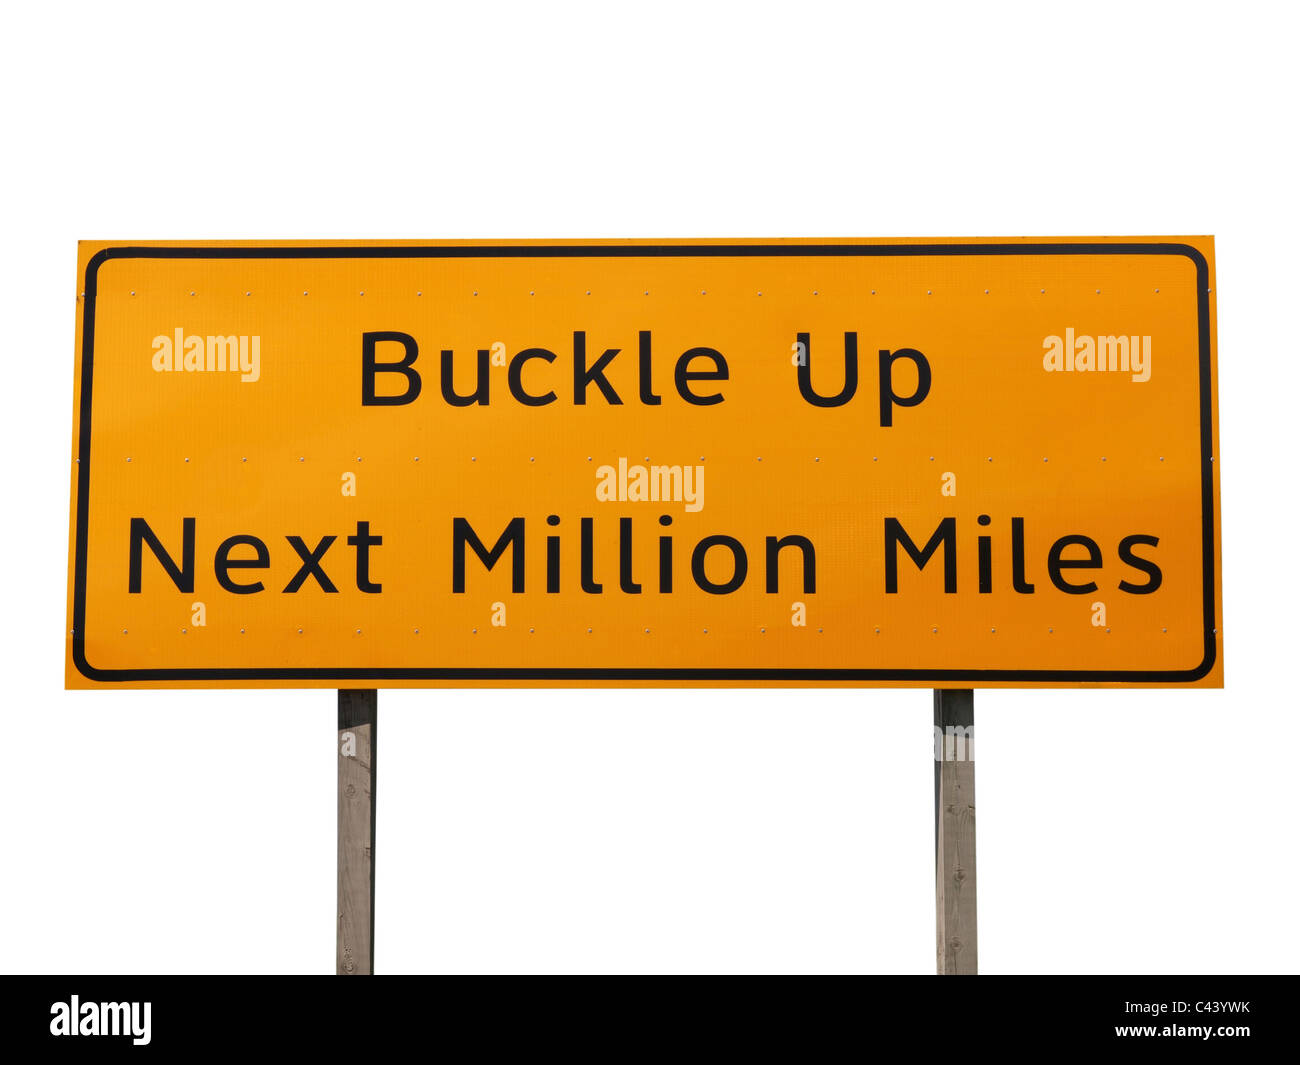 Buckle Up Next Million Miles highway sign. Stock Photo